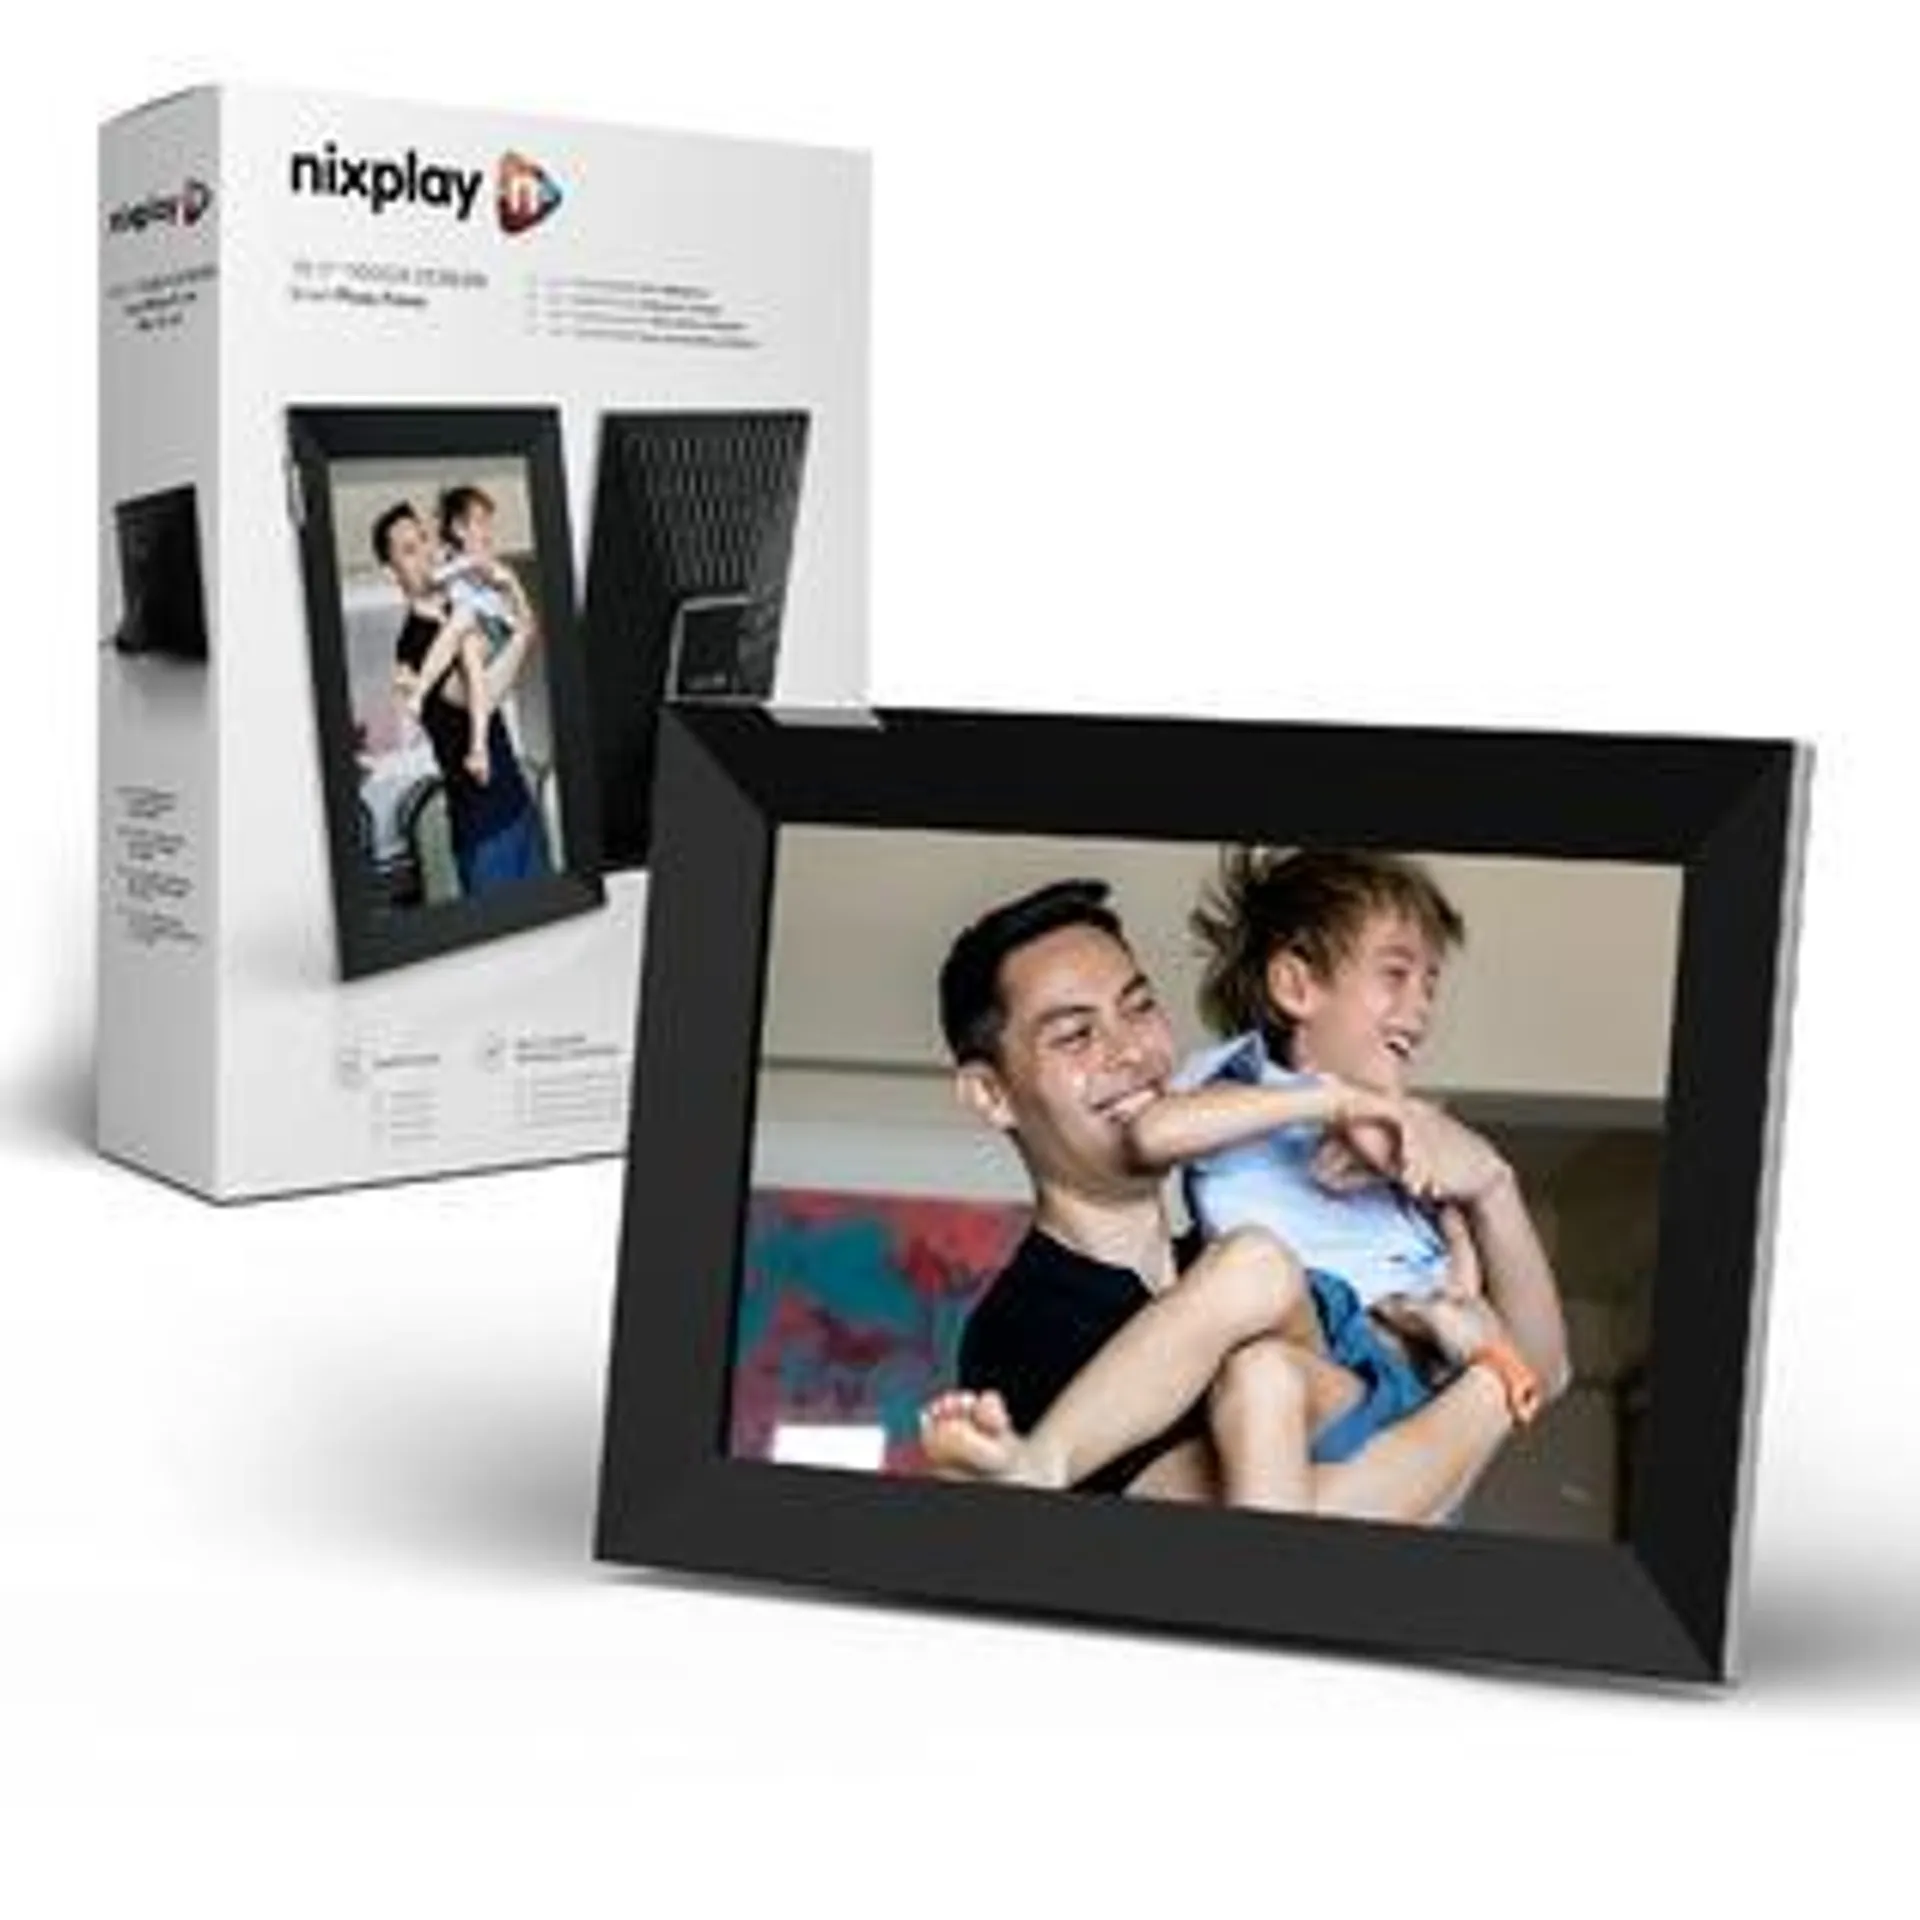 Nixplay 10.1? Digital Photo Frame - Connecting Families & Friends (Black/Silver)